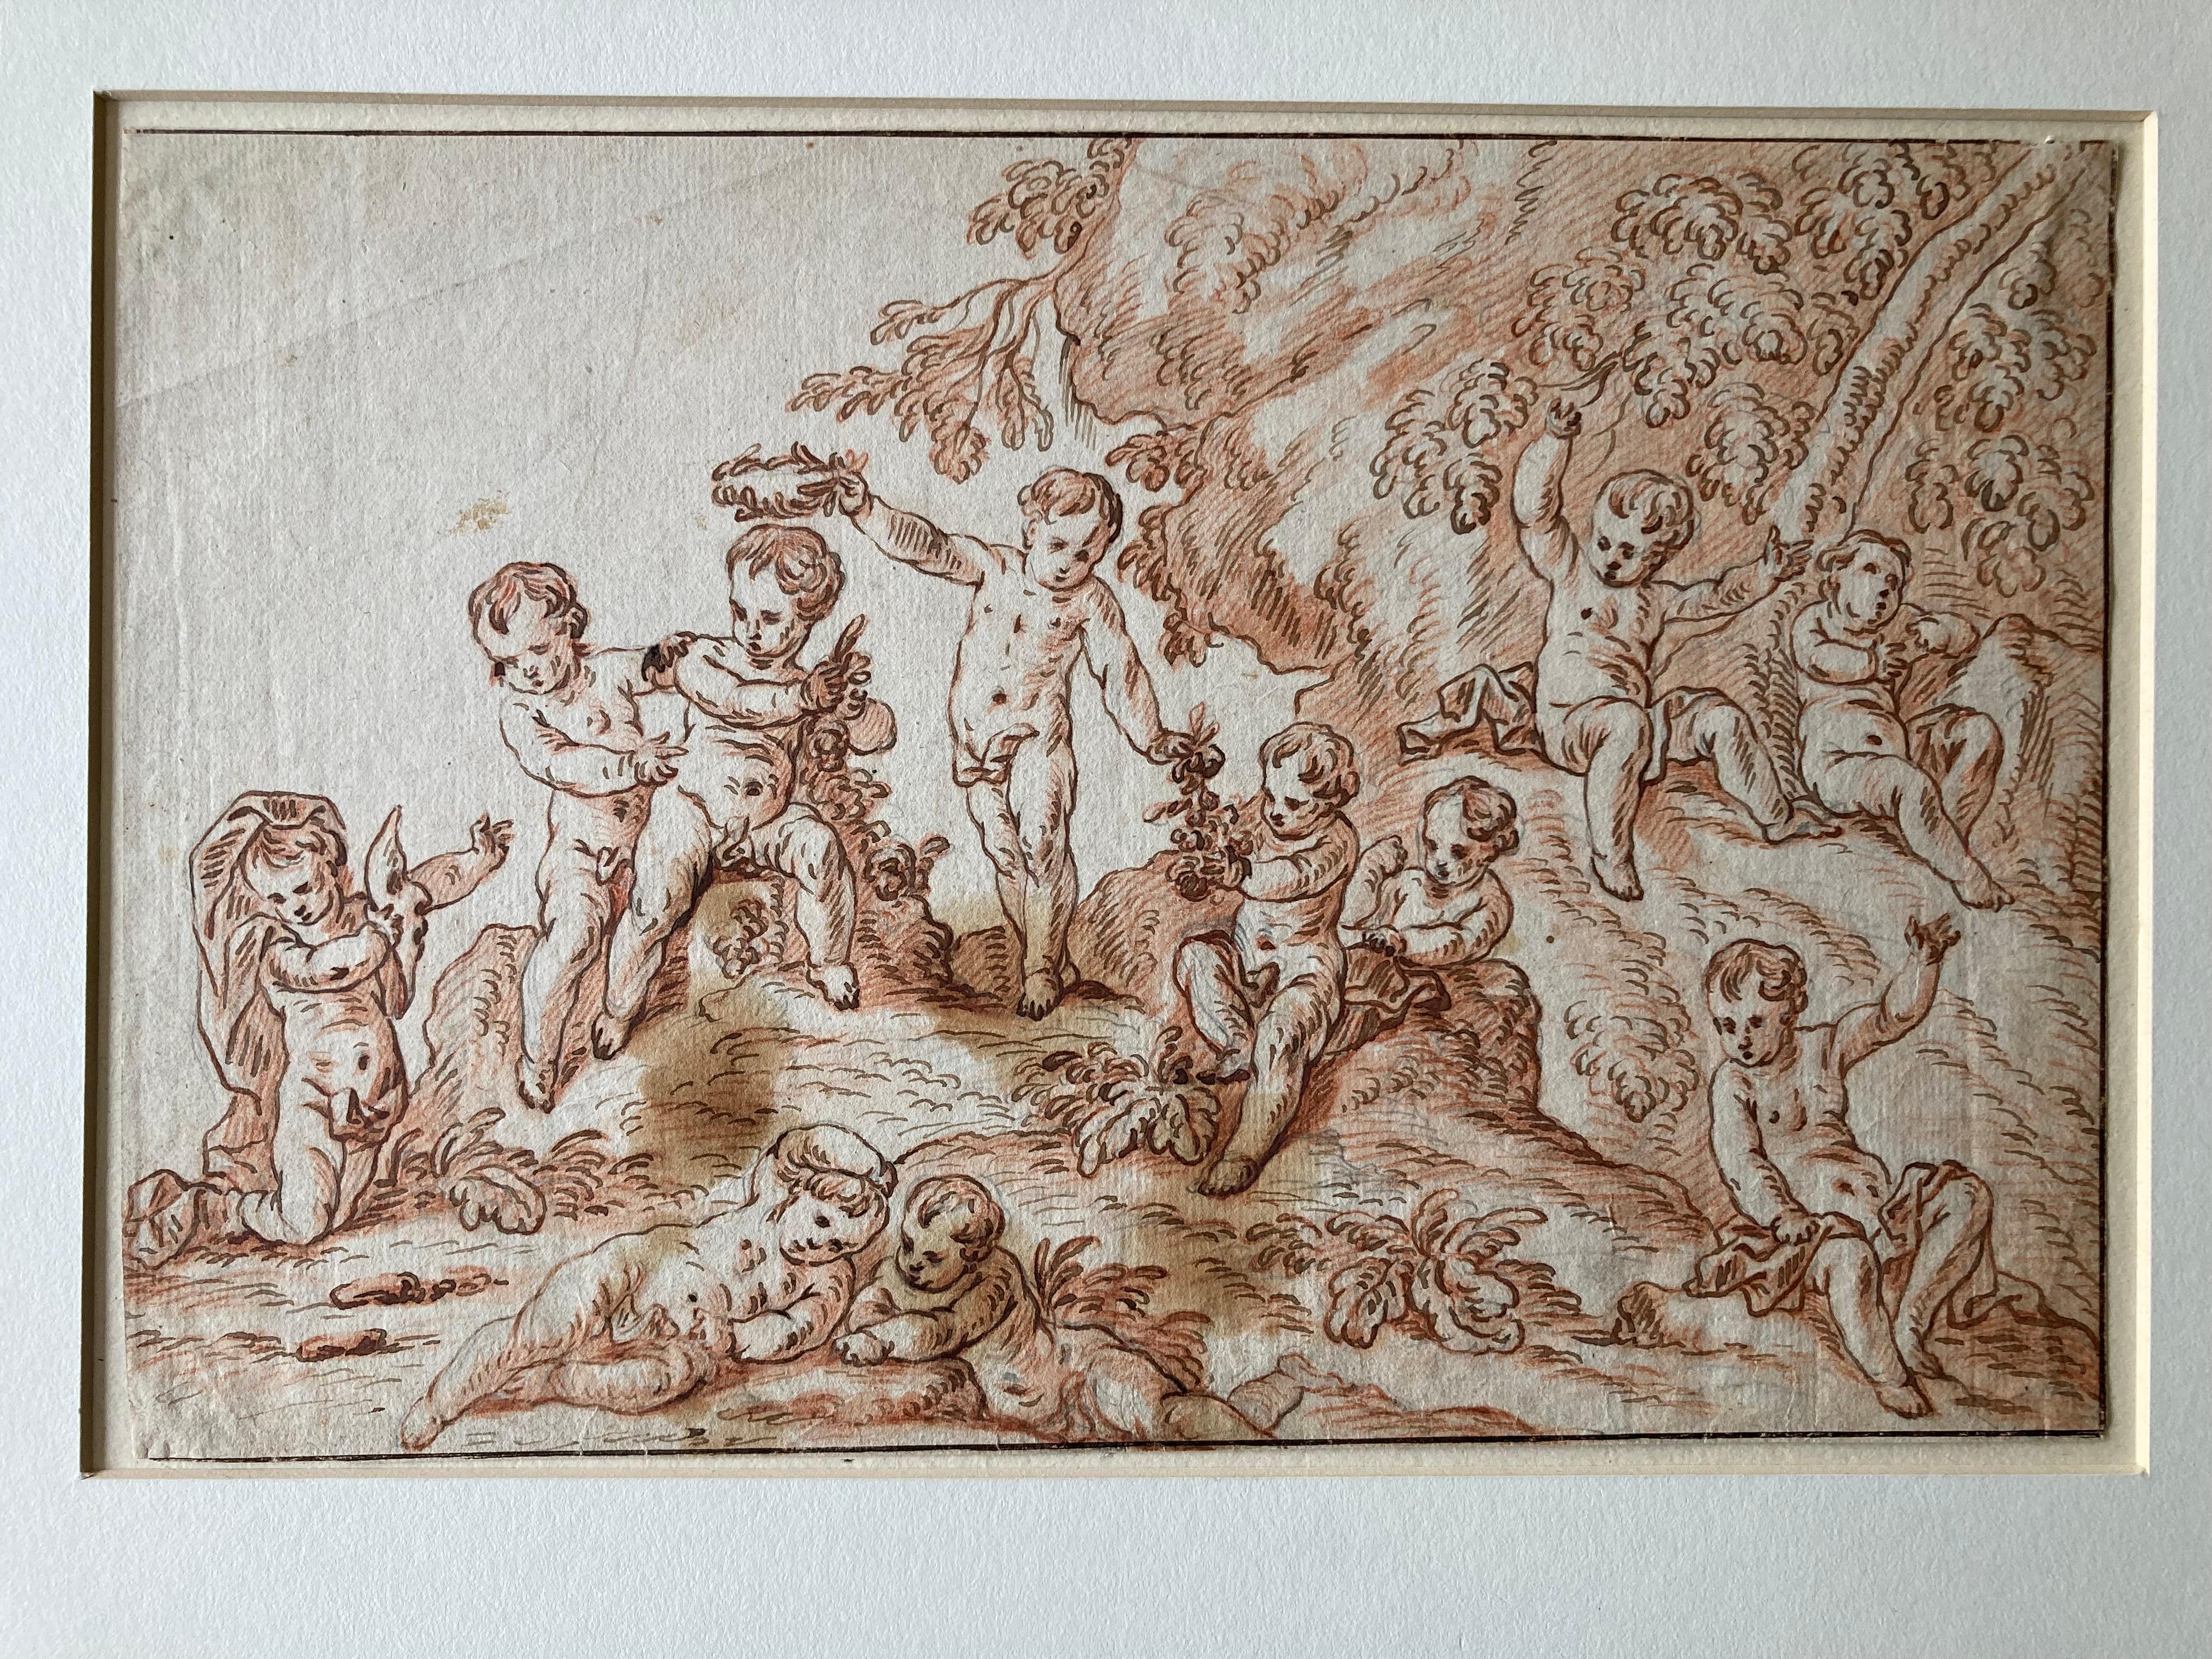 Putti in a Landscape, Putti playing, flowers, Berchet, French Art, Old Master For Sale 5